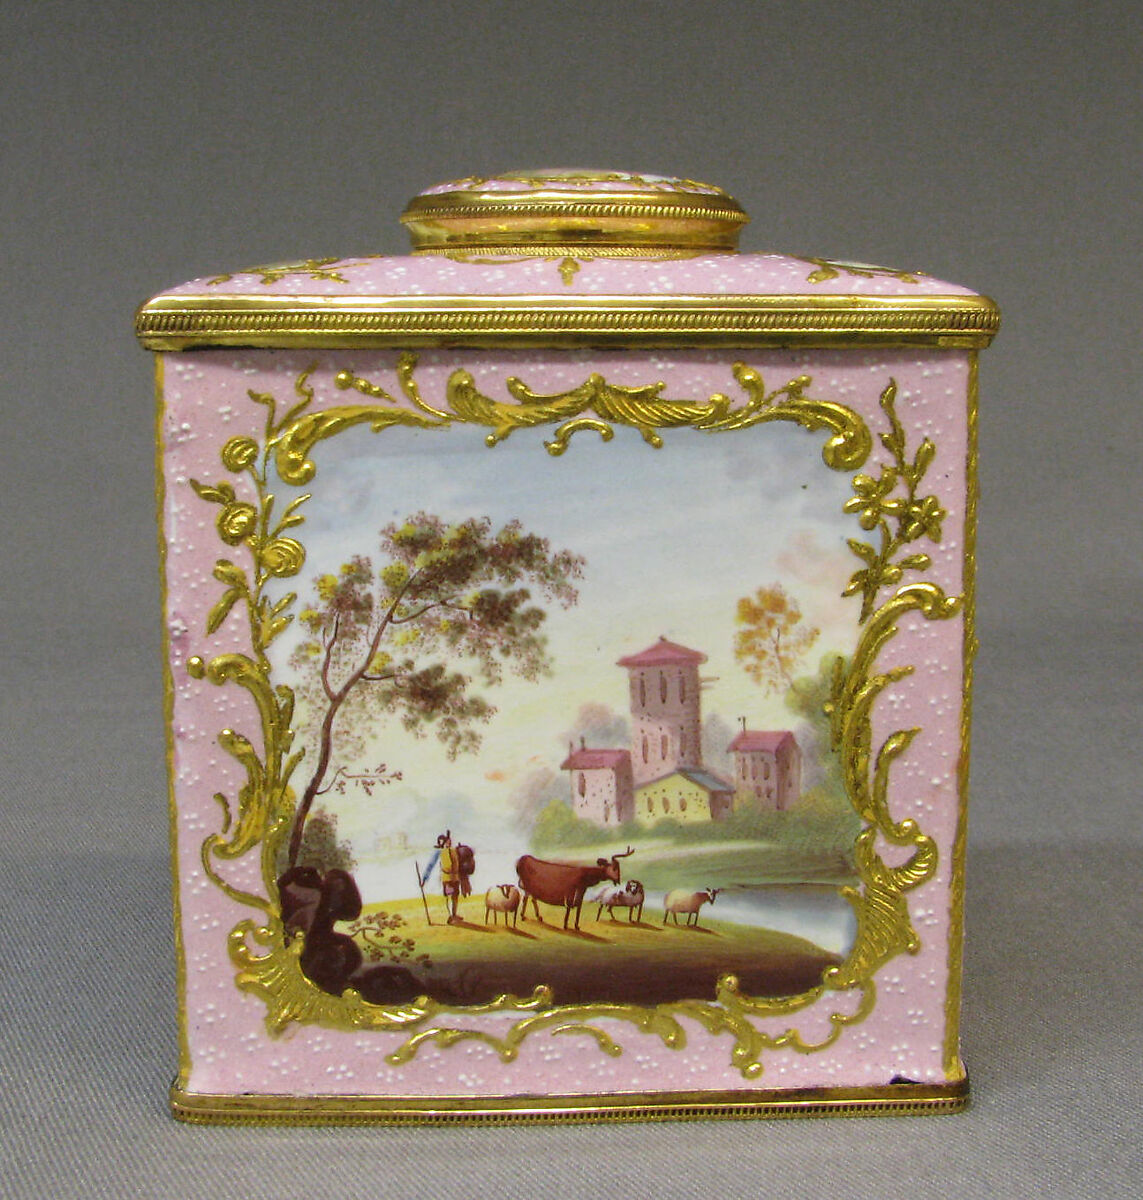 Tea caddy (part of a set), White enamel on copper painted in polychrome enamels, British, South Staffordshire 